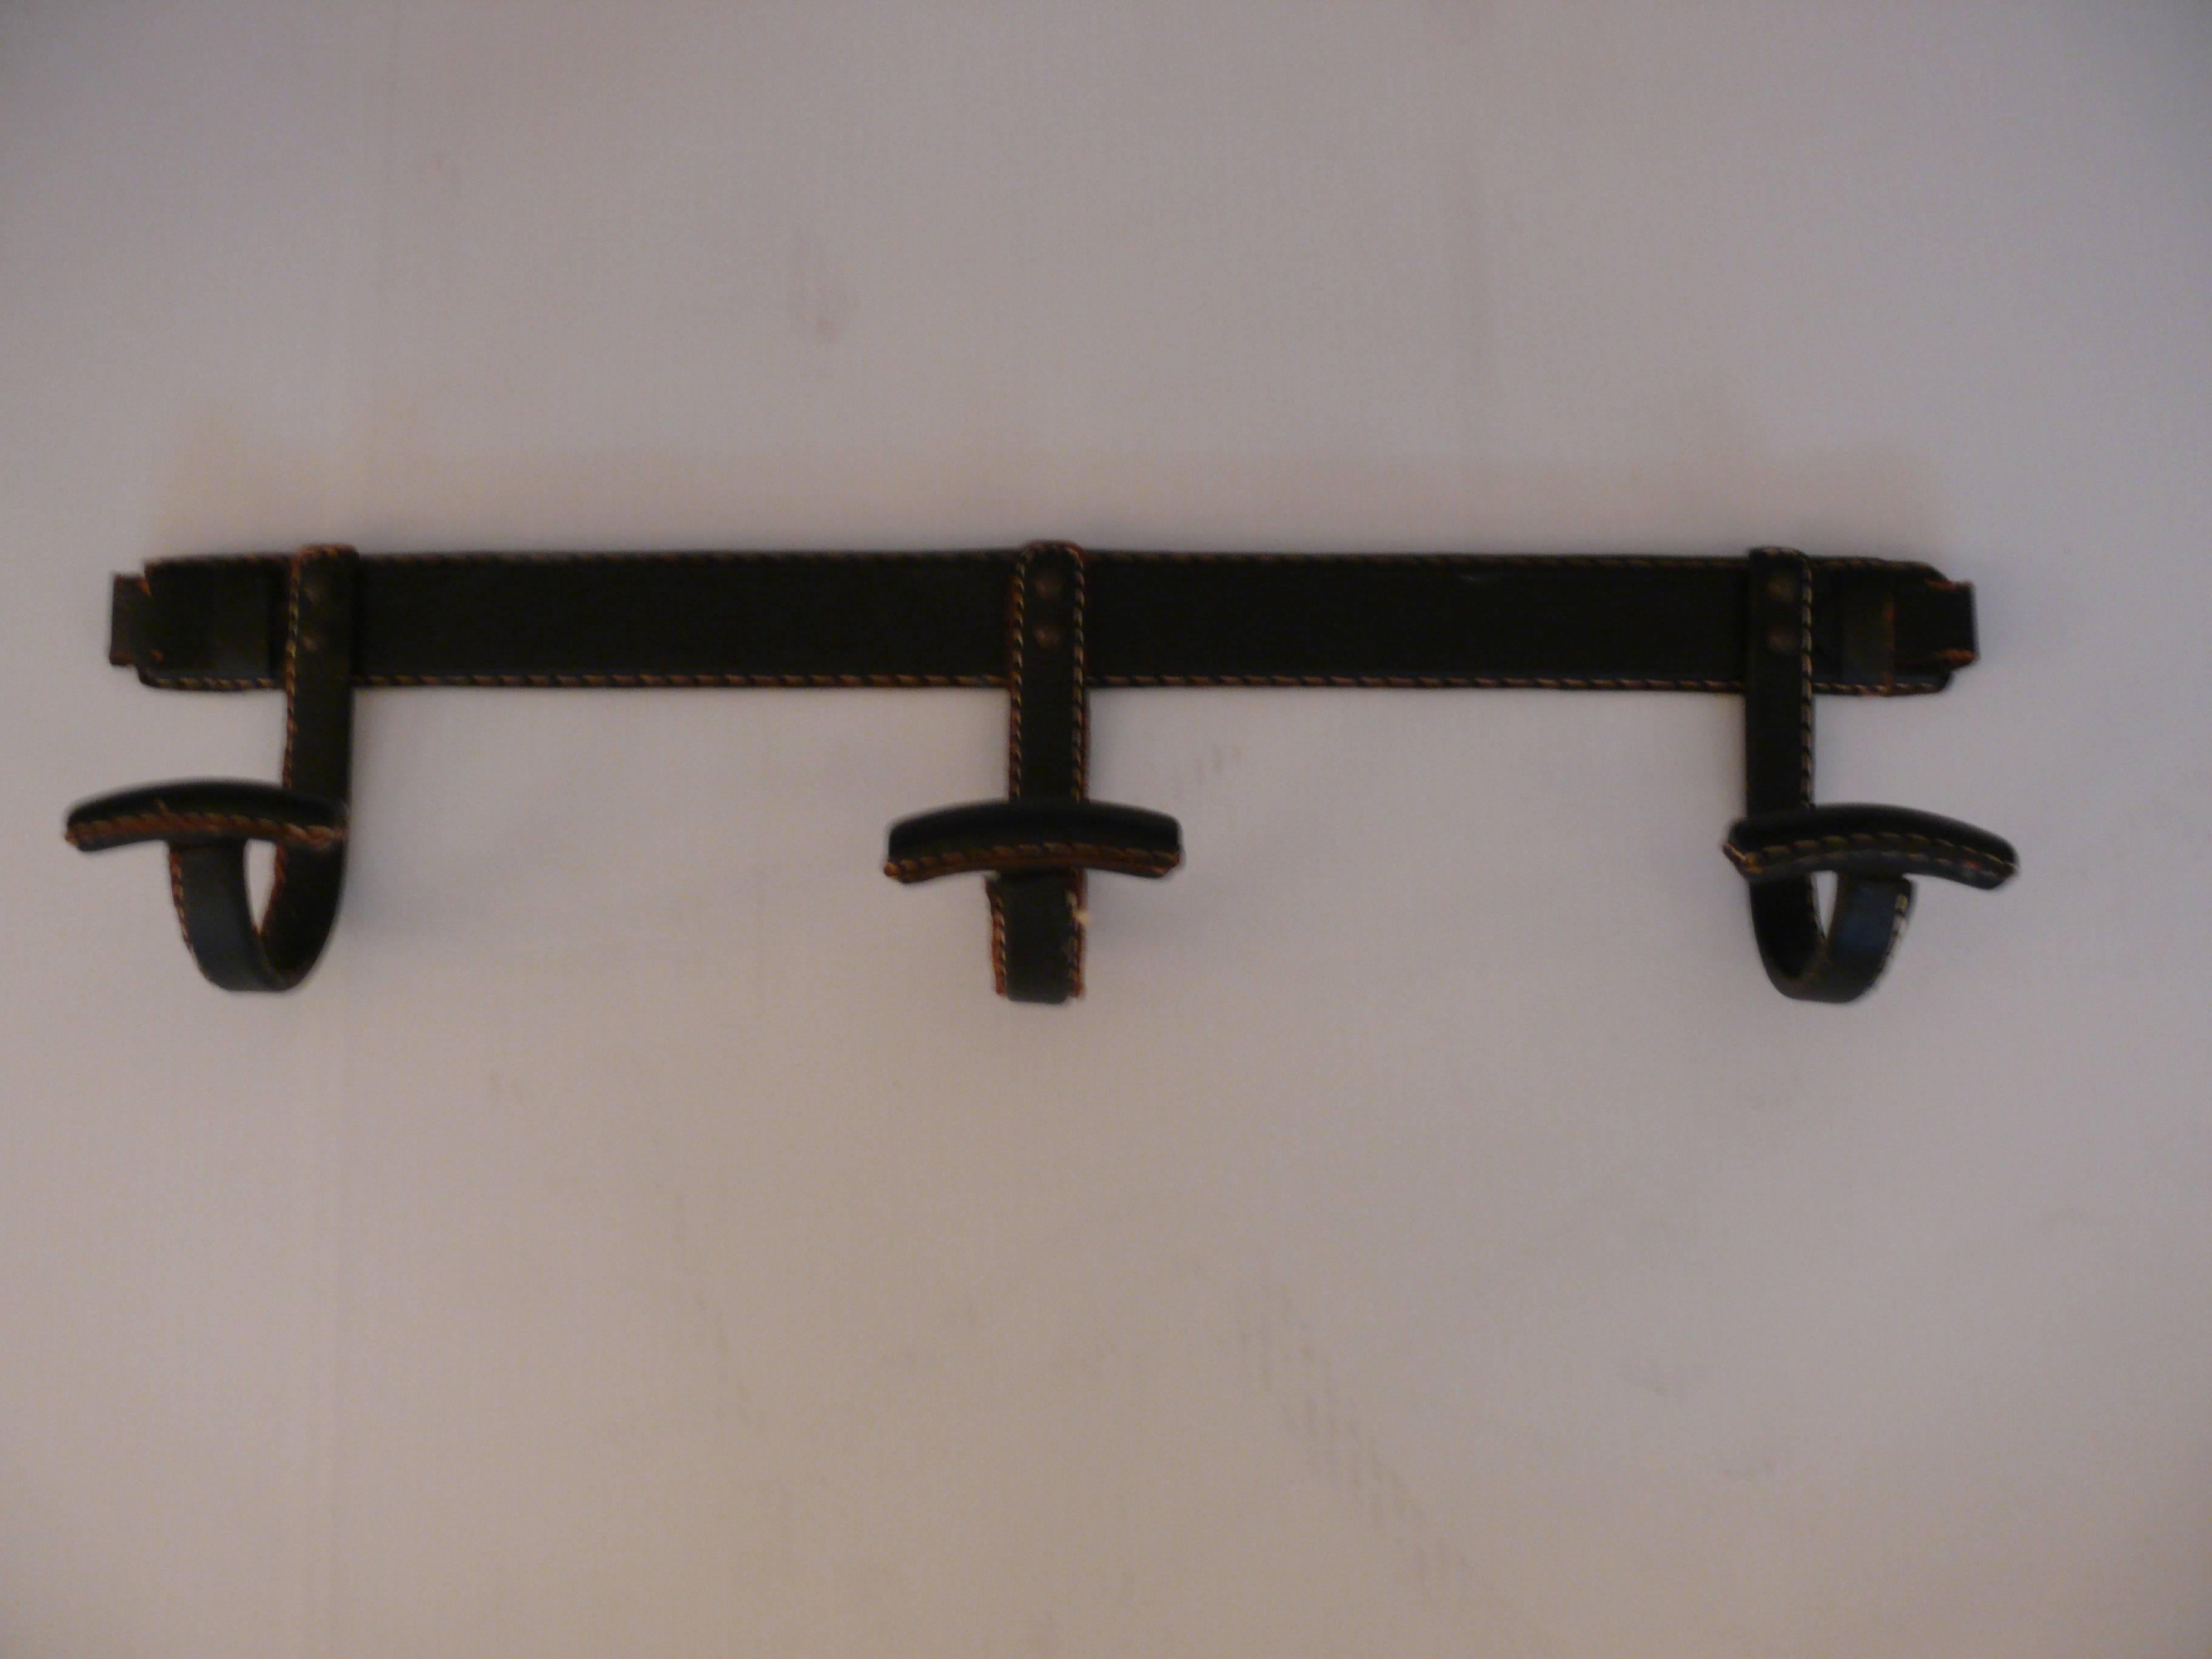 Handsome leather coat rack by Jacques Adnet. Black leather with contrast stitching on an iron frame. Excellent vintage condition.